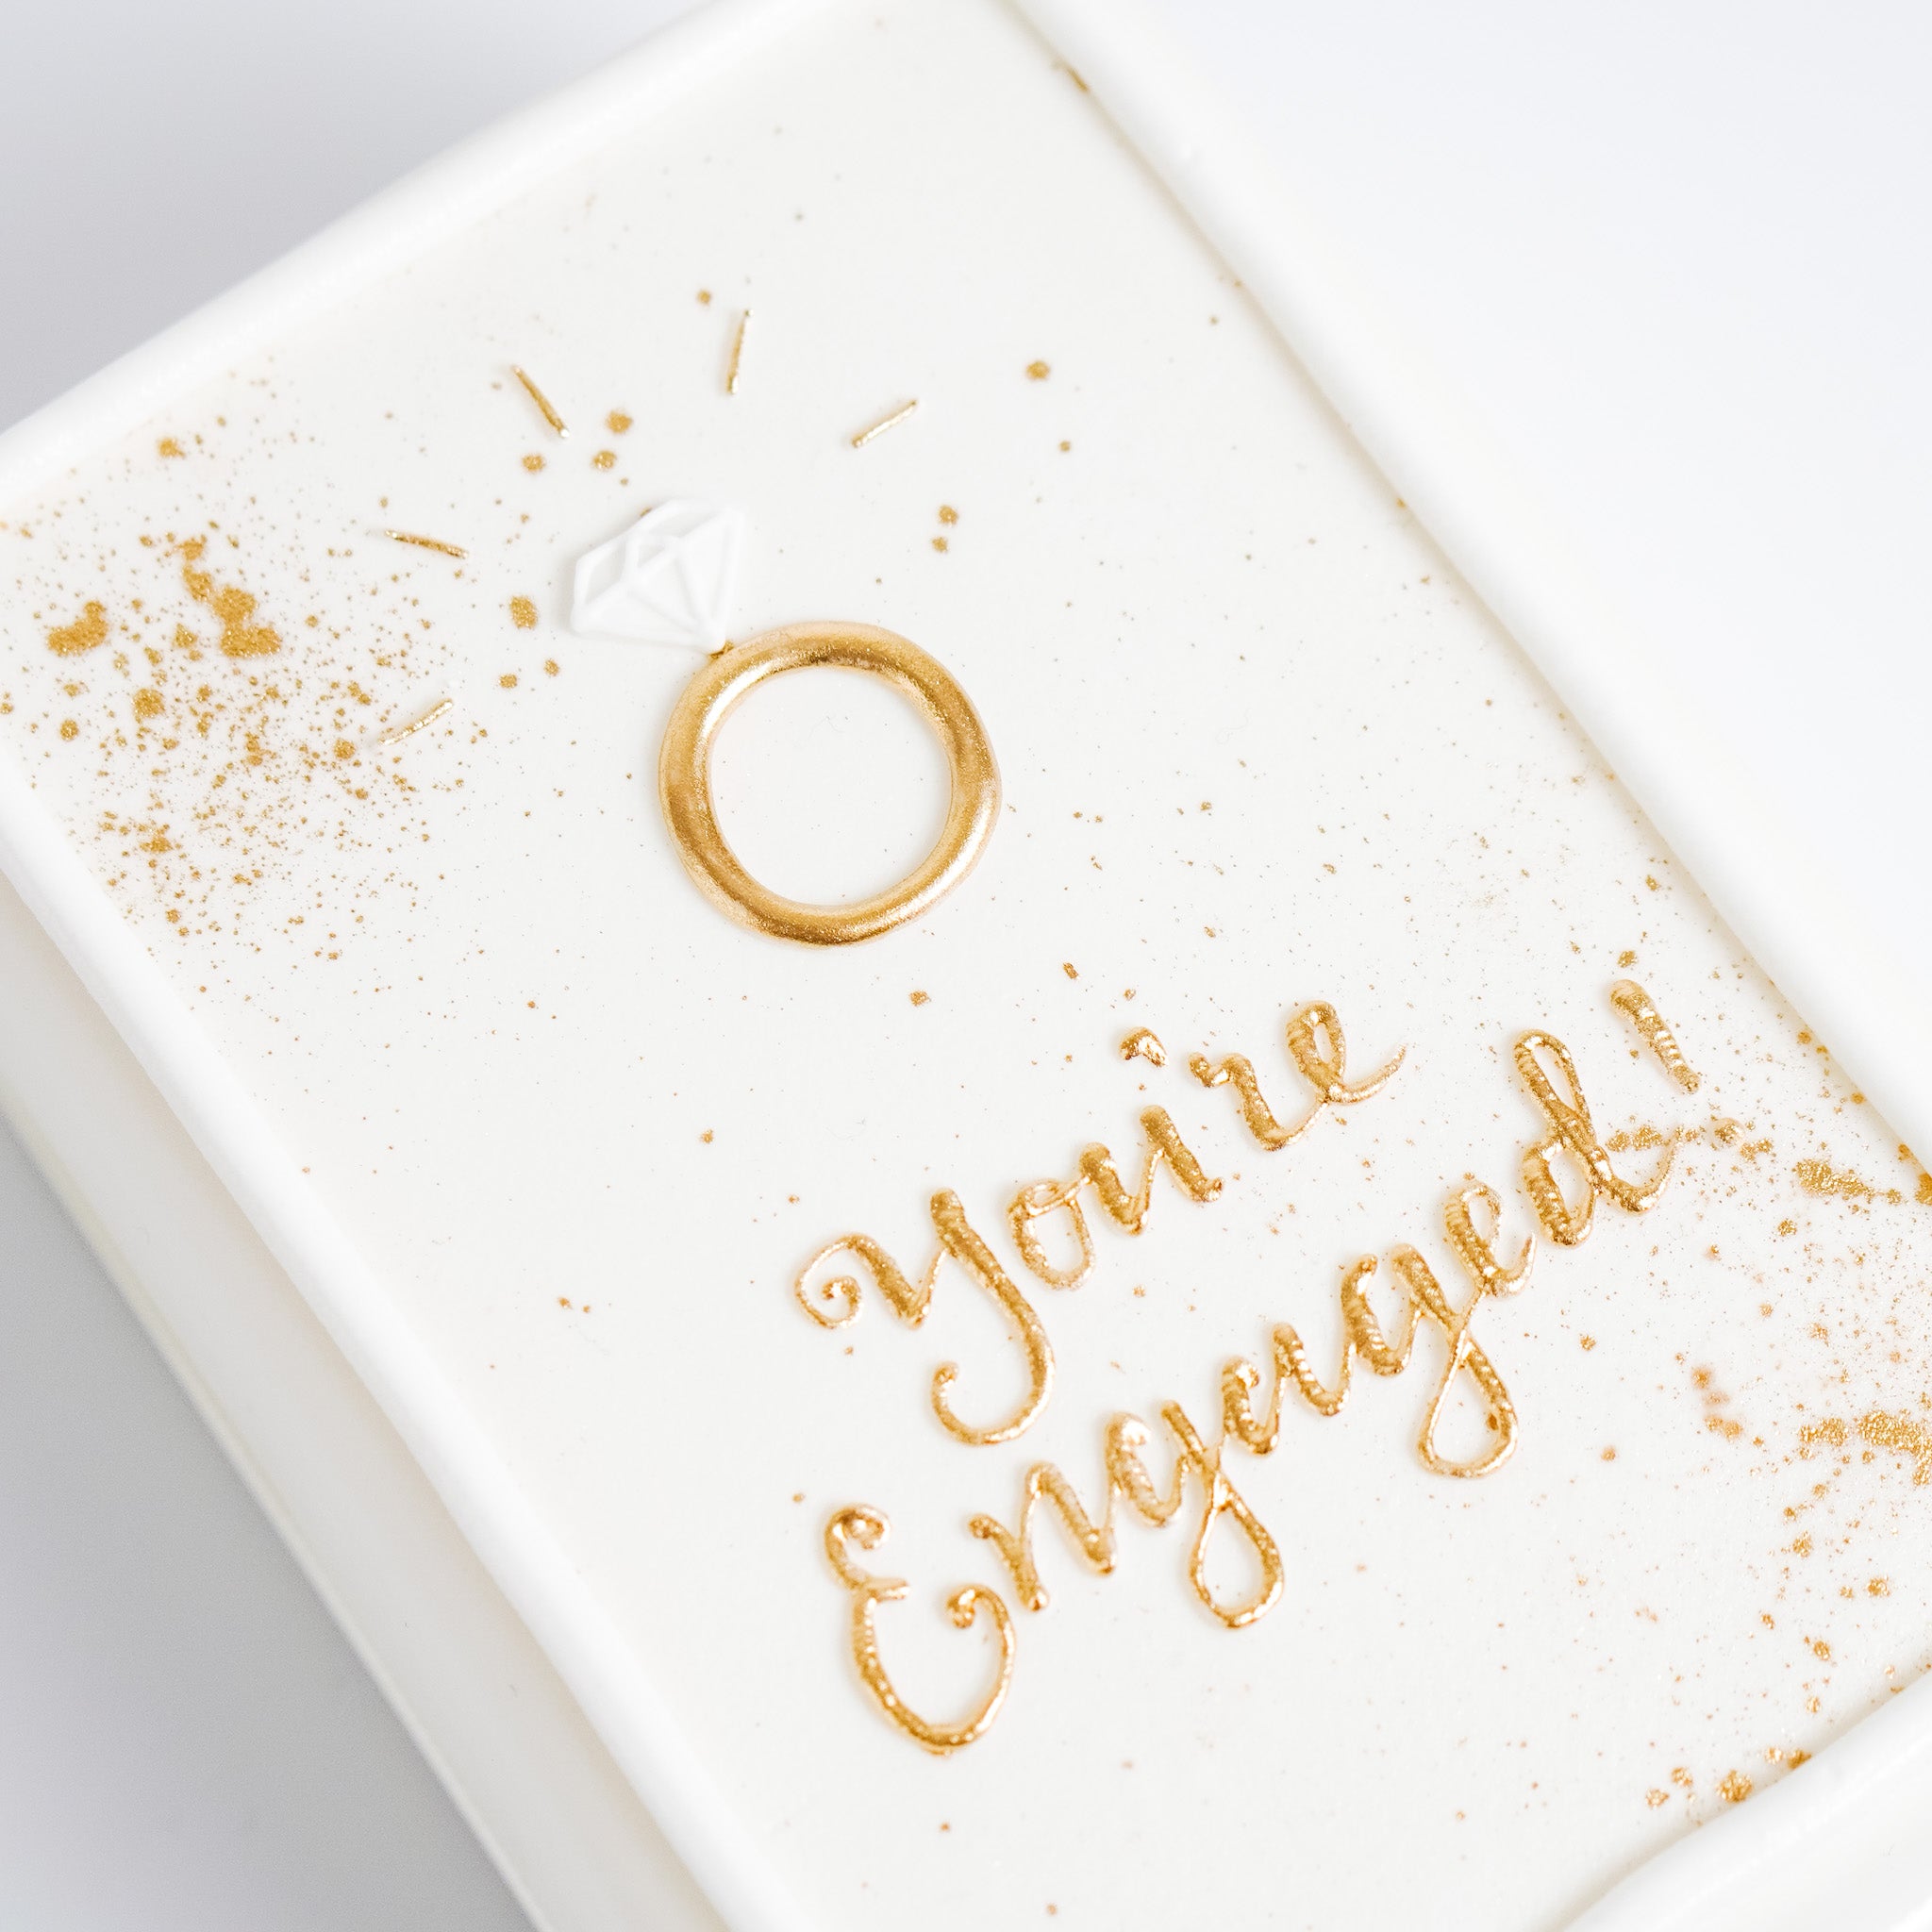 Forever Together: You're Engaged Cake